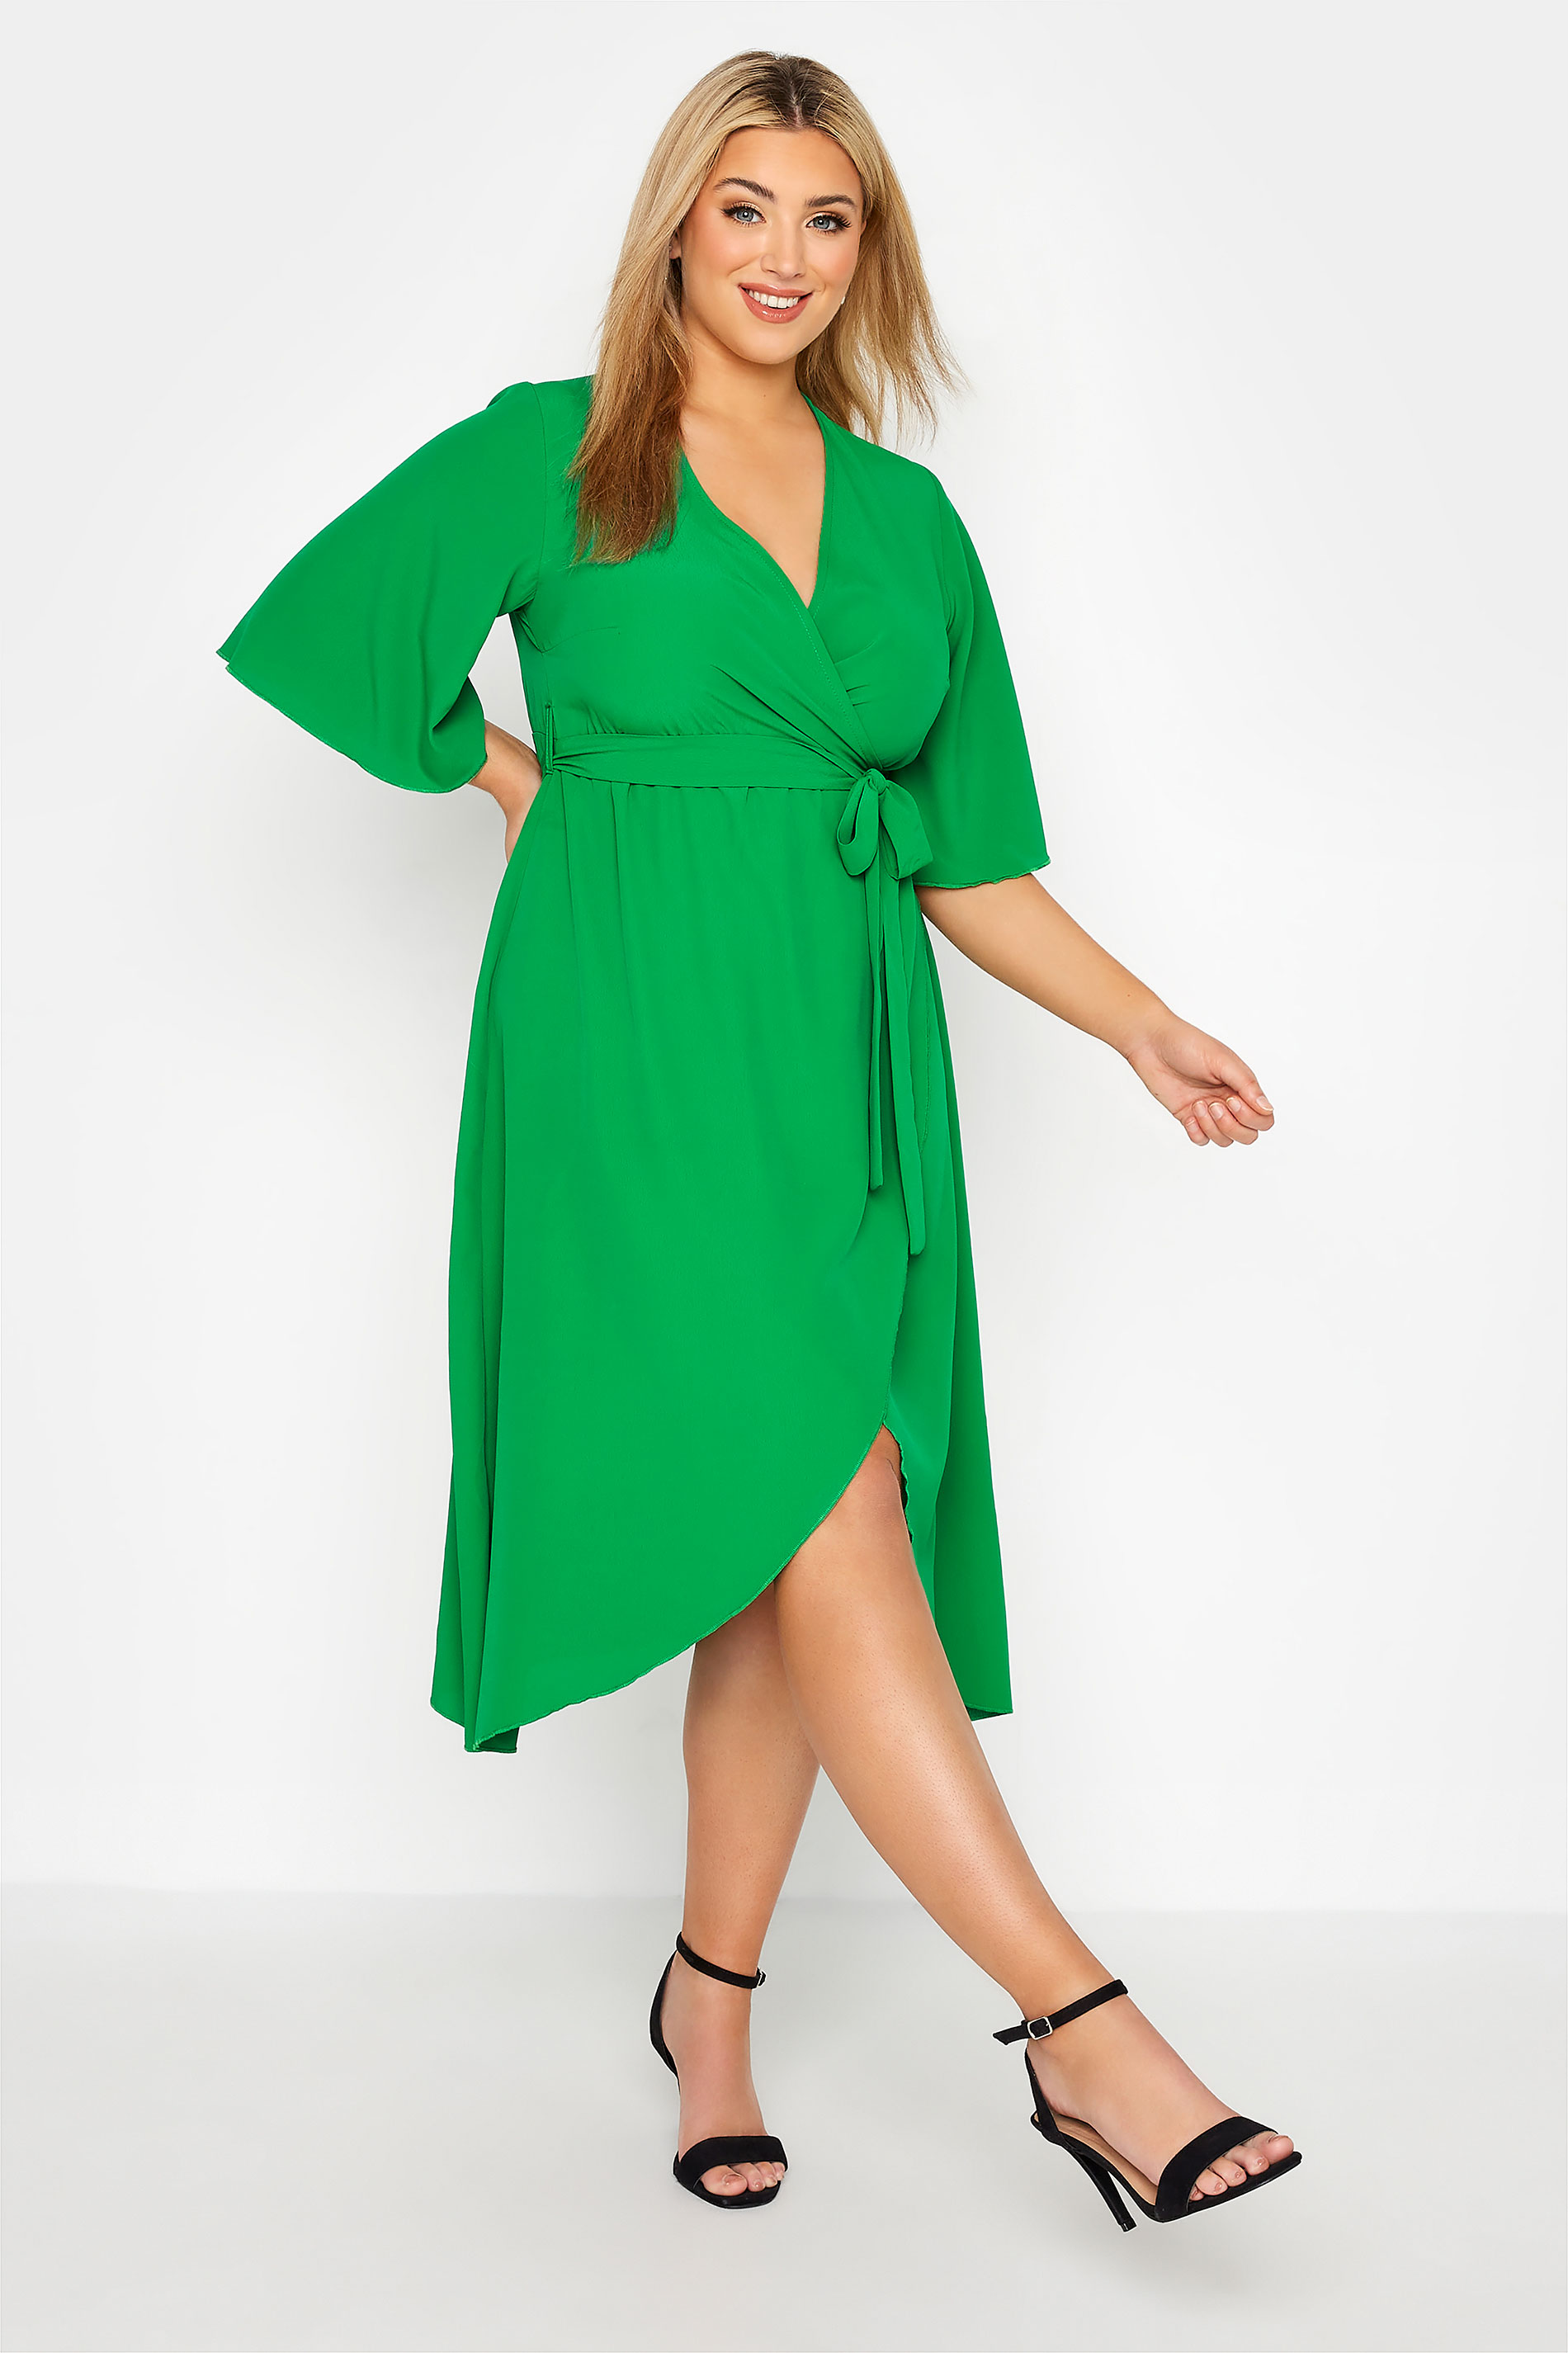 Robes Grande Taille Grande taille  Robes Portefeuilles | YOURS LONDON - Robe Verte Style Portefeuille - MM96945